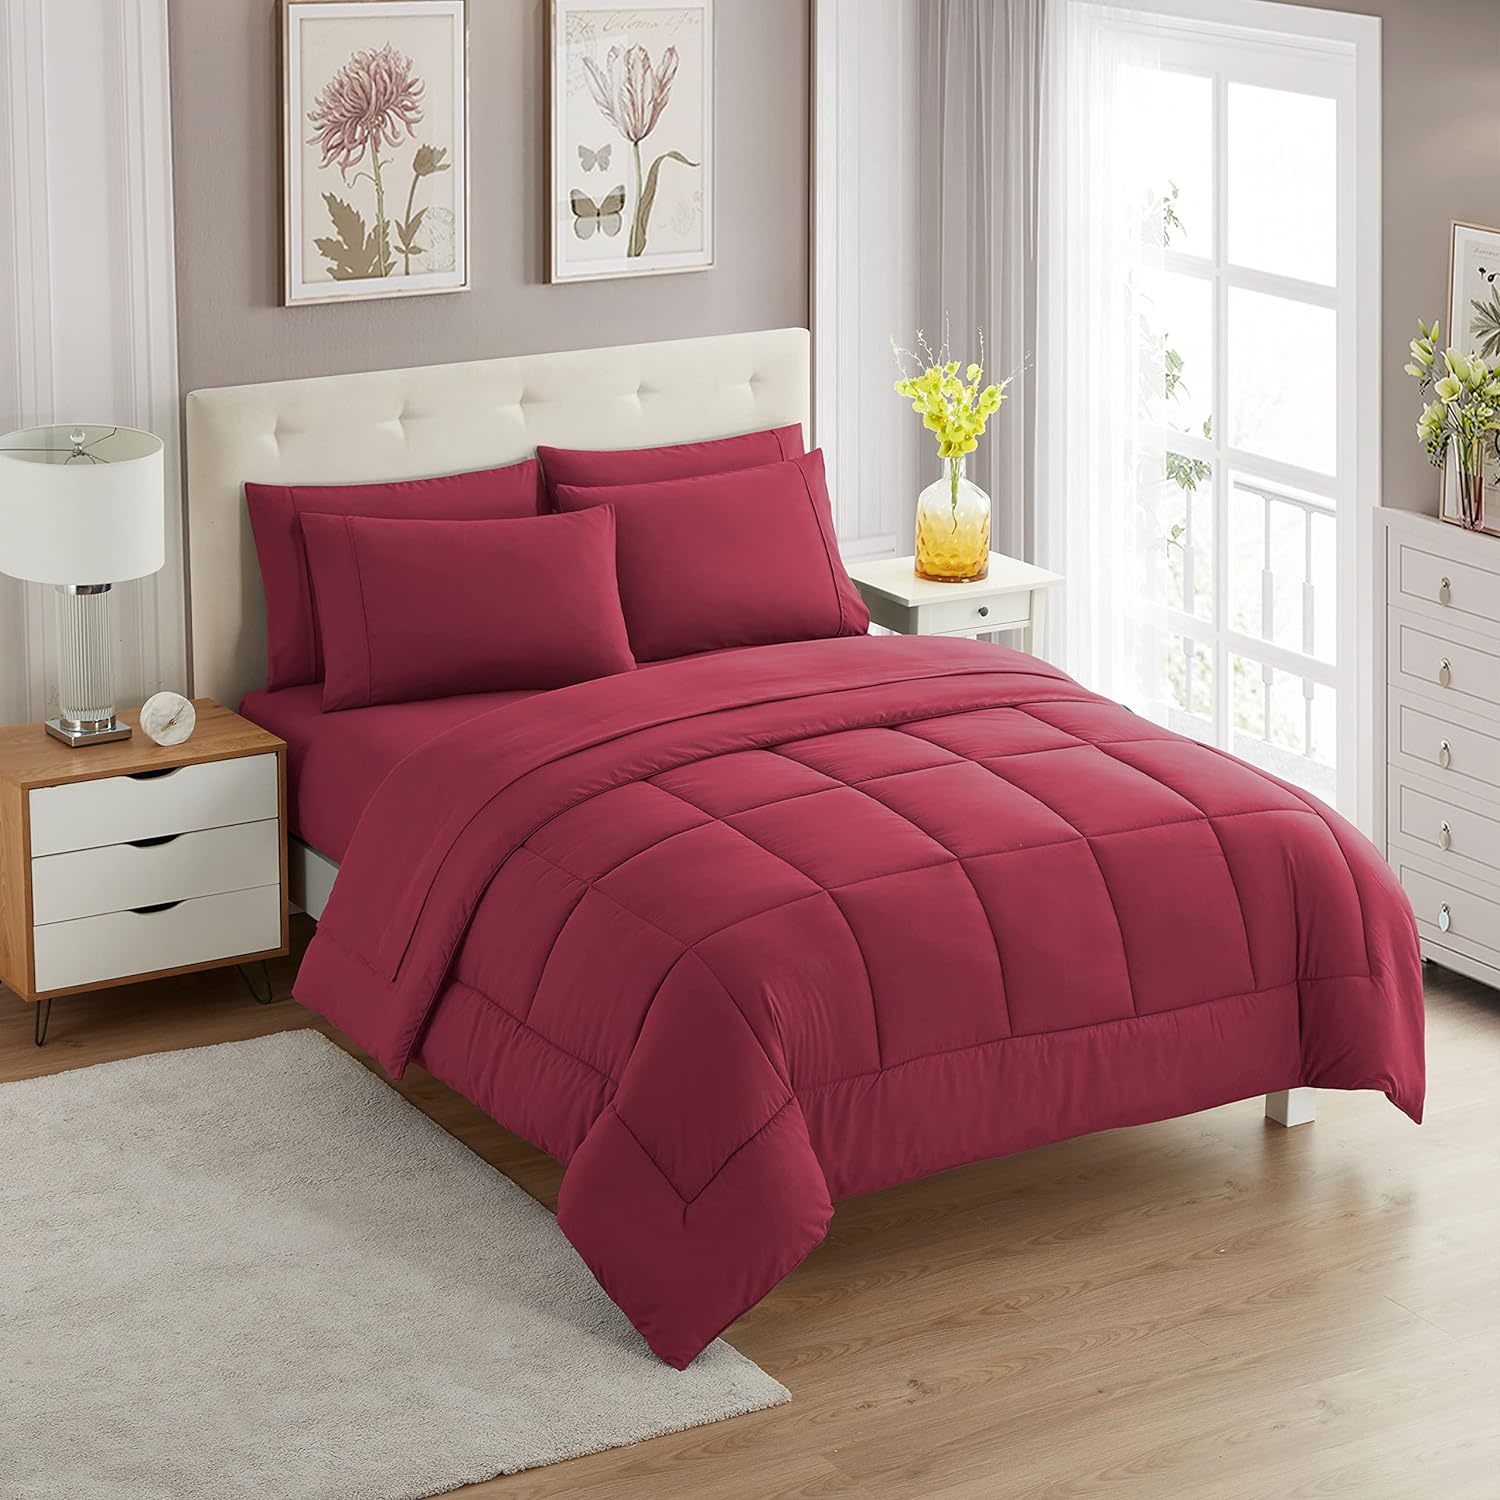 Solid Color All-Season Soft Down Alternative Blanket And Opulent, Burgundy. - $56.94